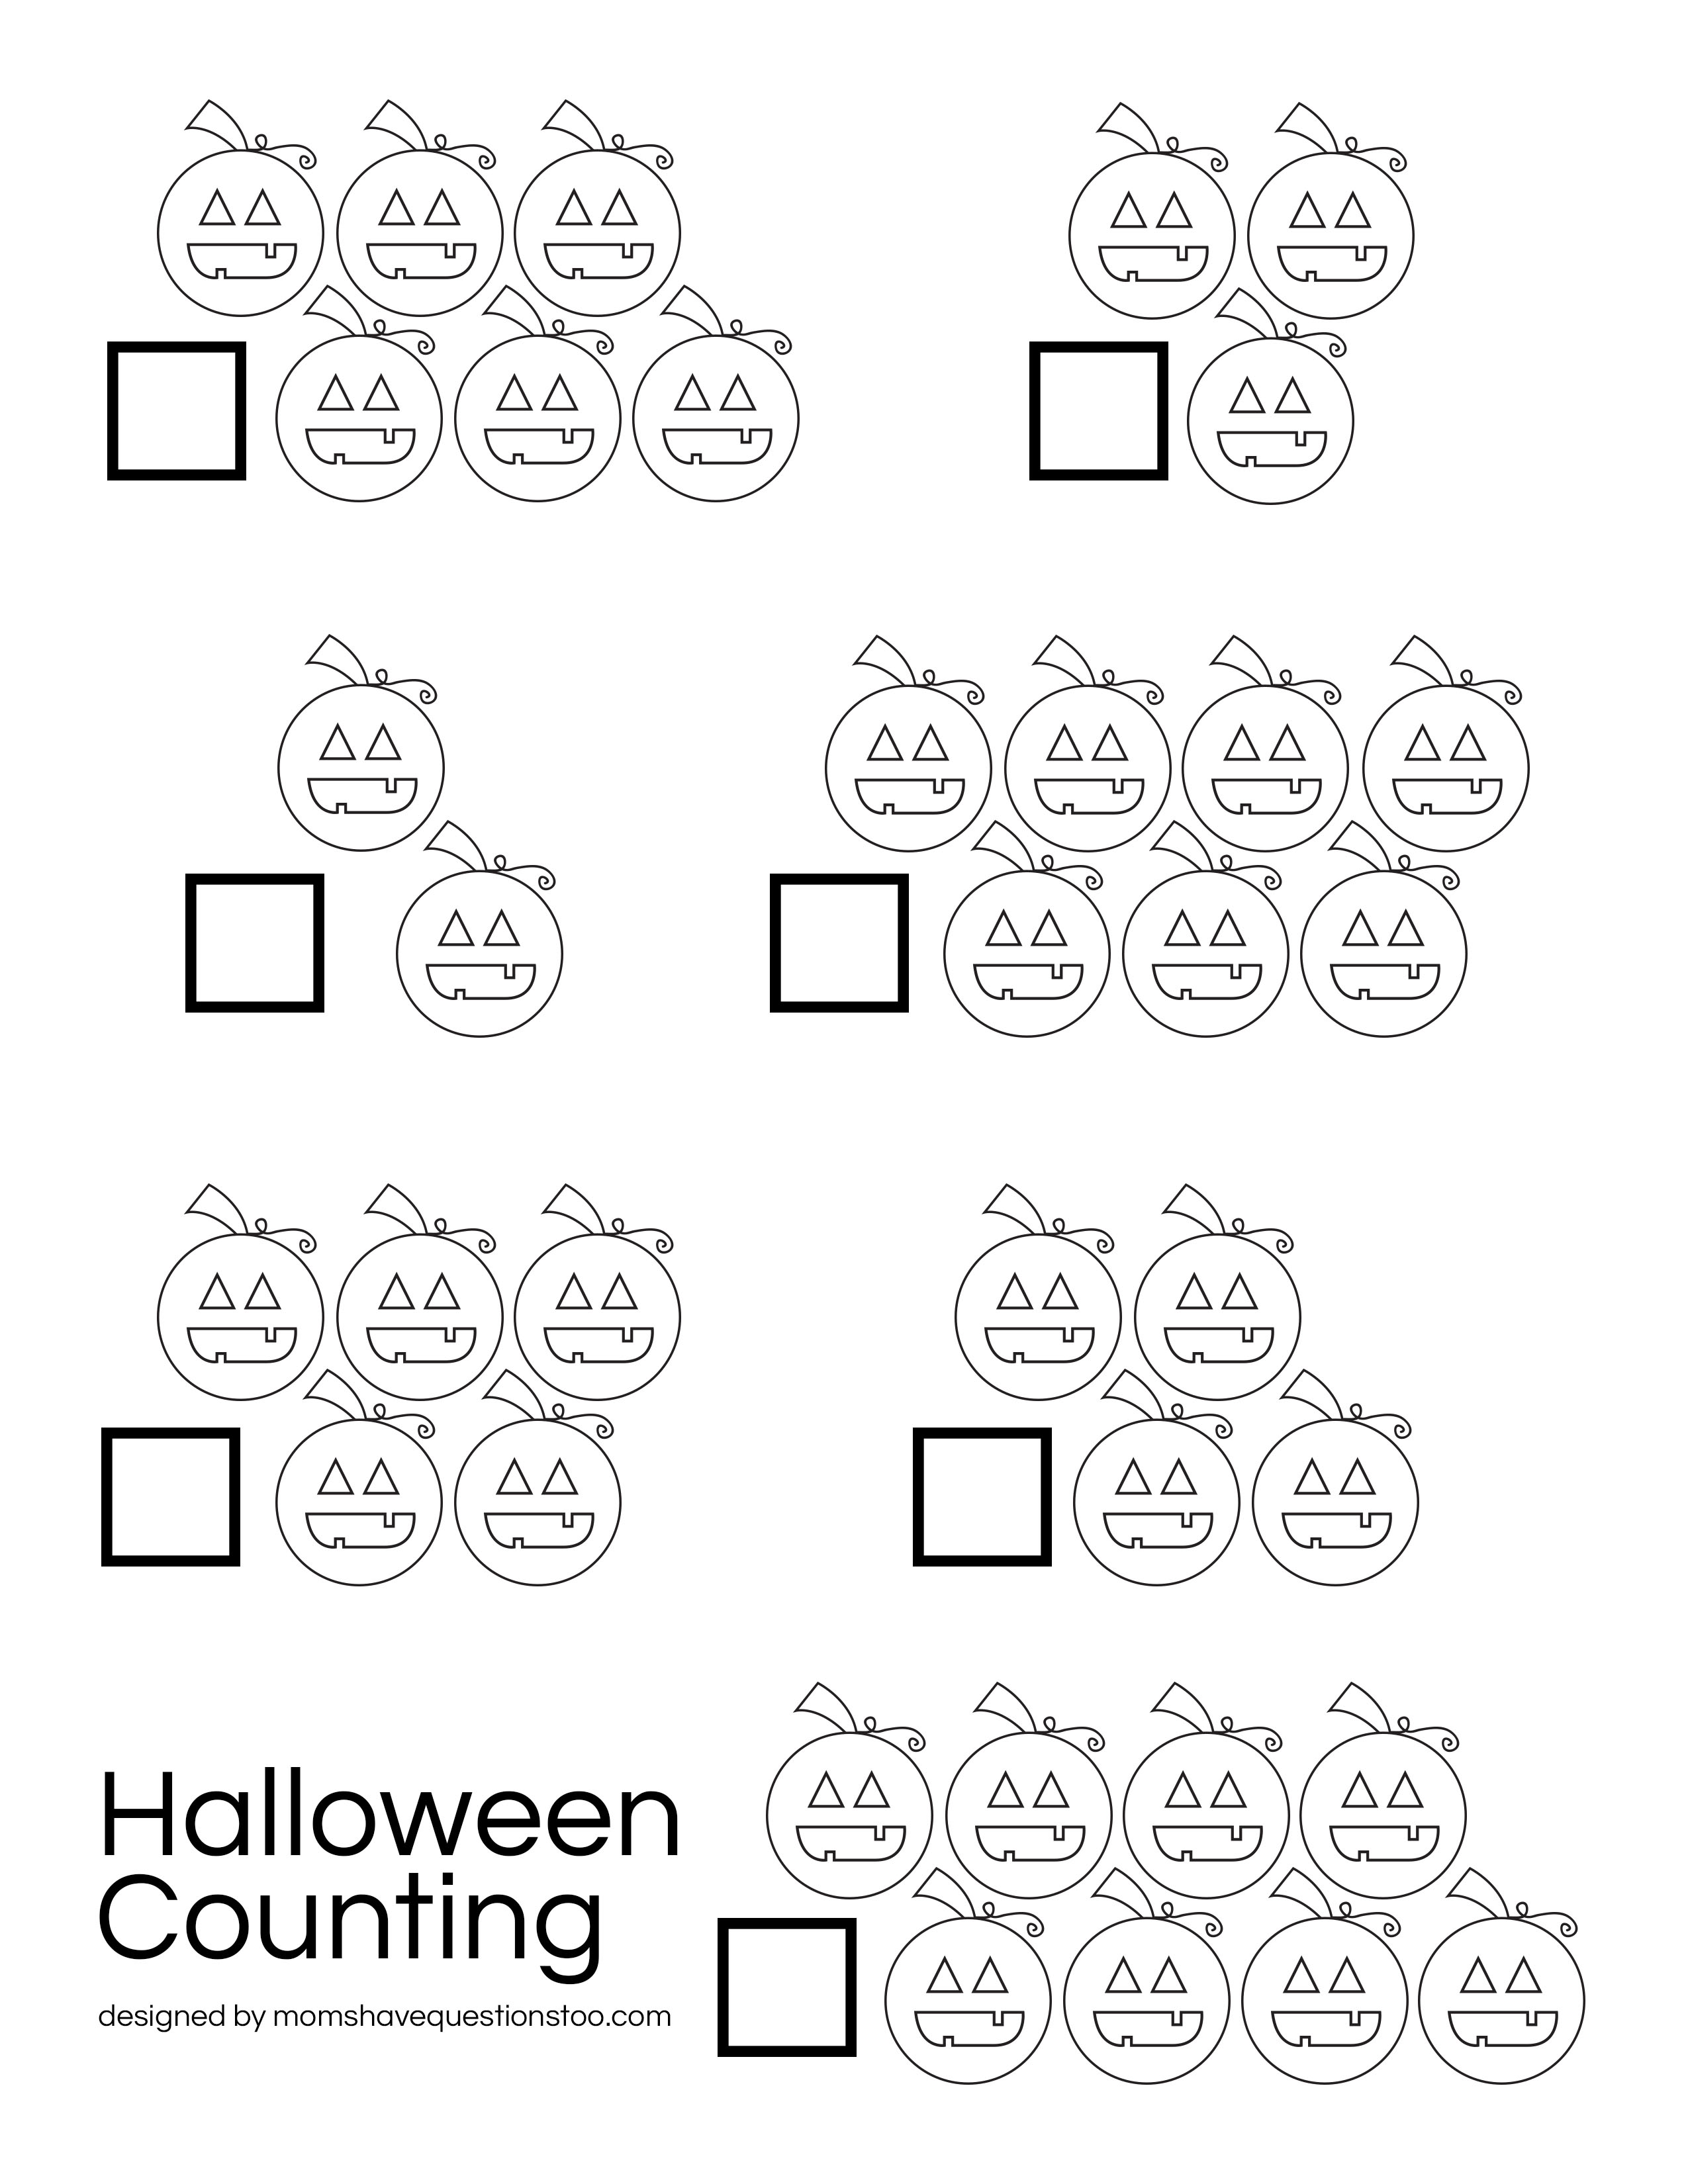 Halloween Counting Moms Have Questions Too